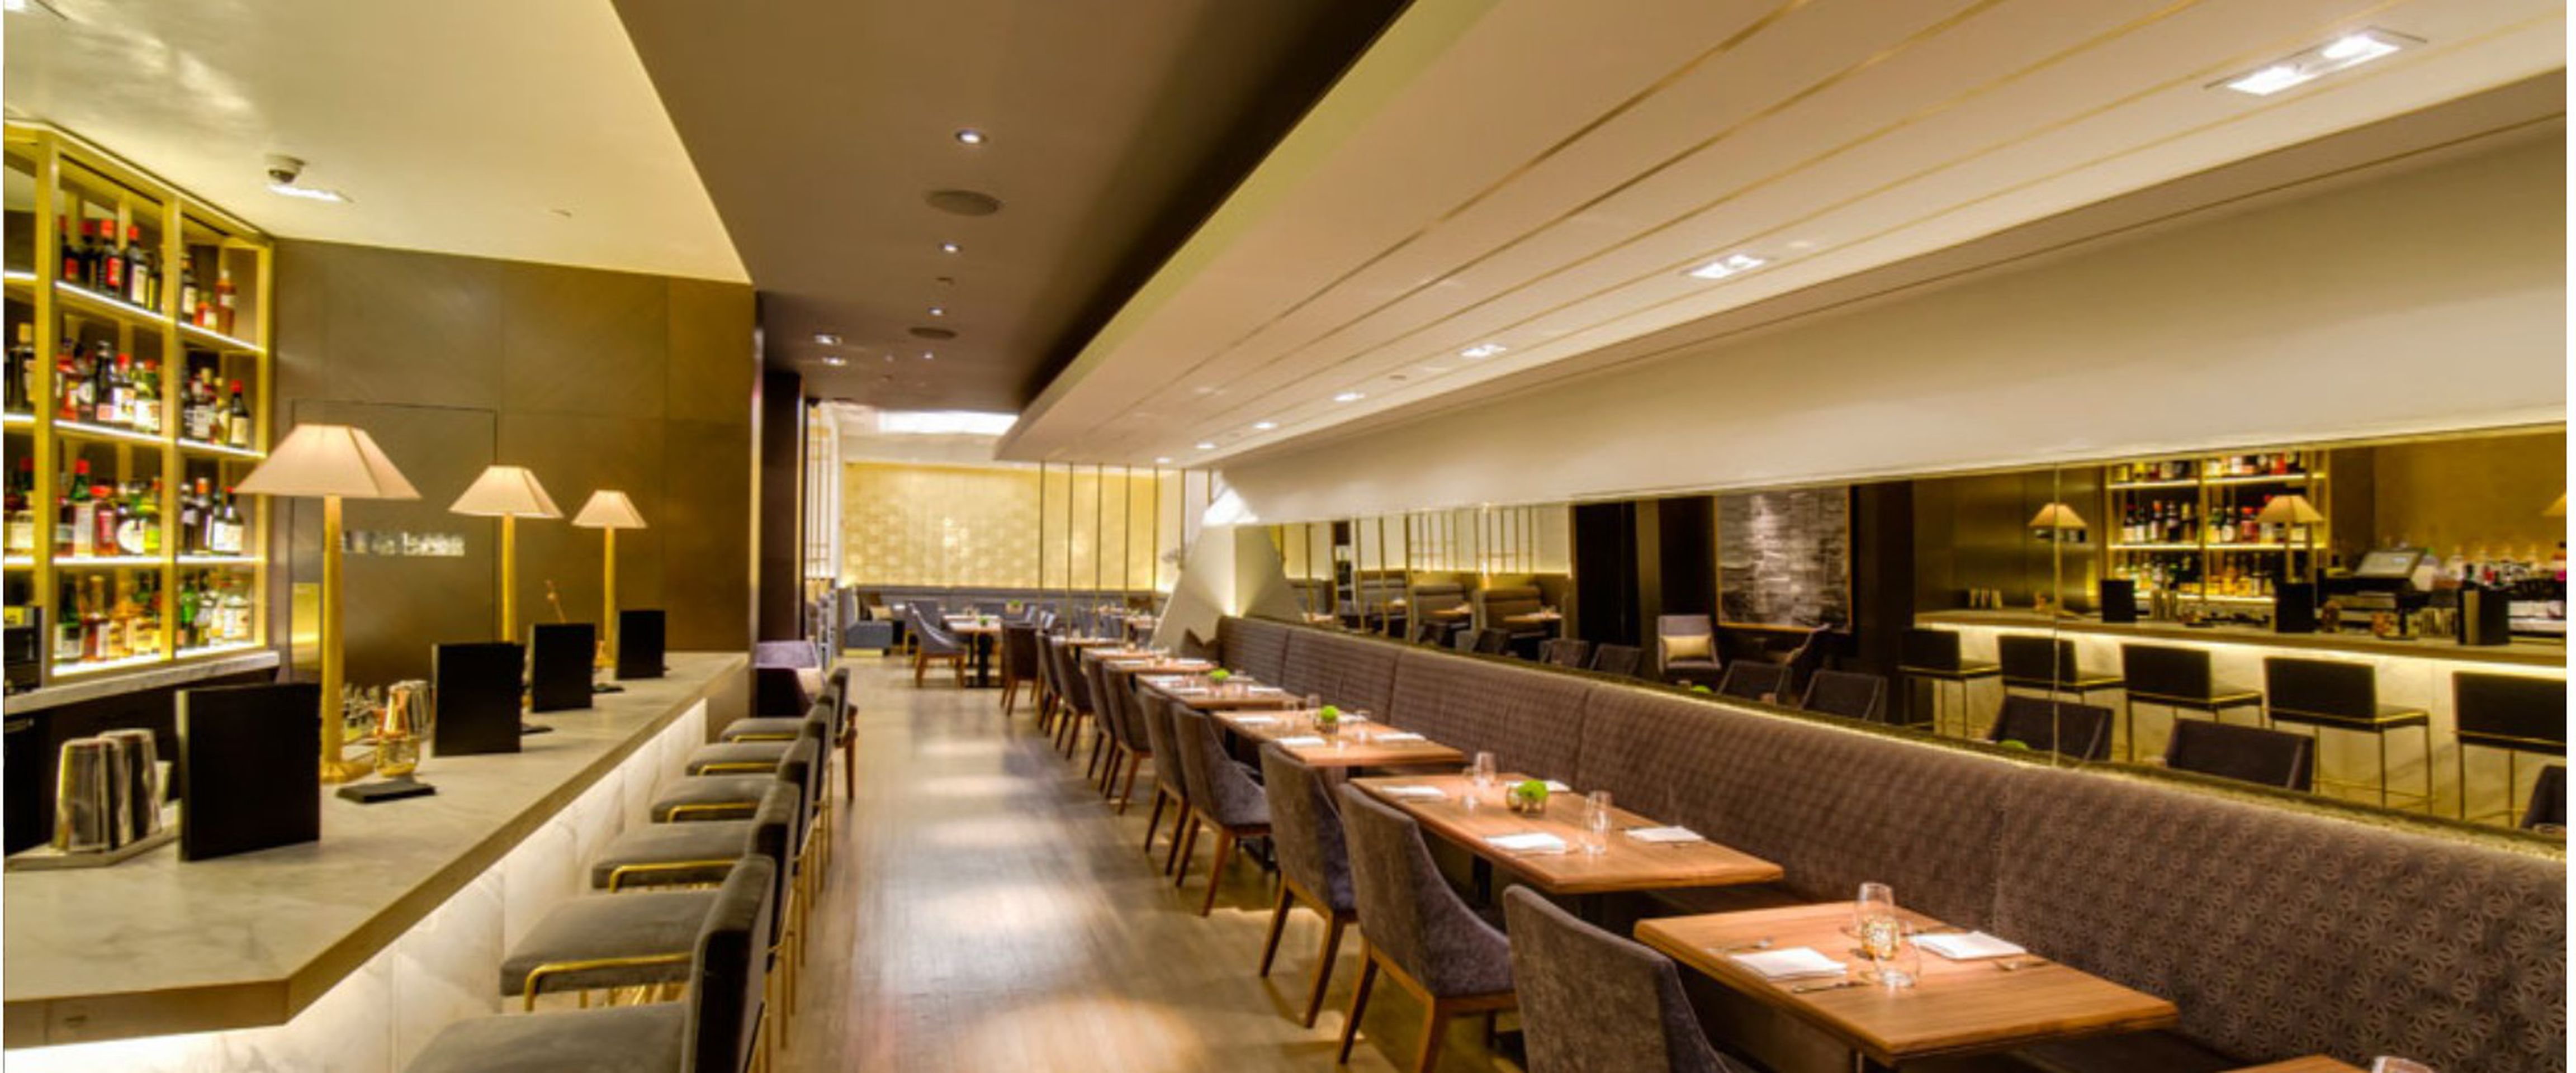 Indian Accent, New York. 10 Best Indian Restaurants in the U.S for NRIs.
